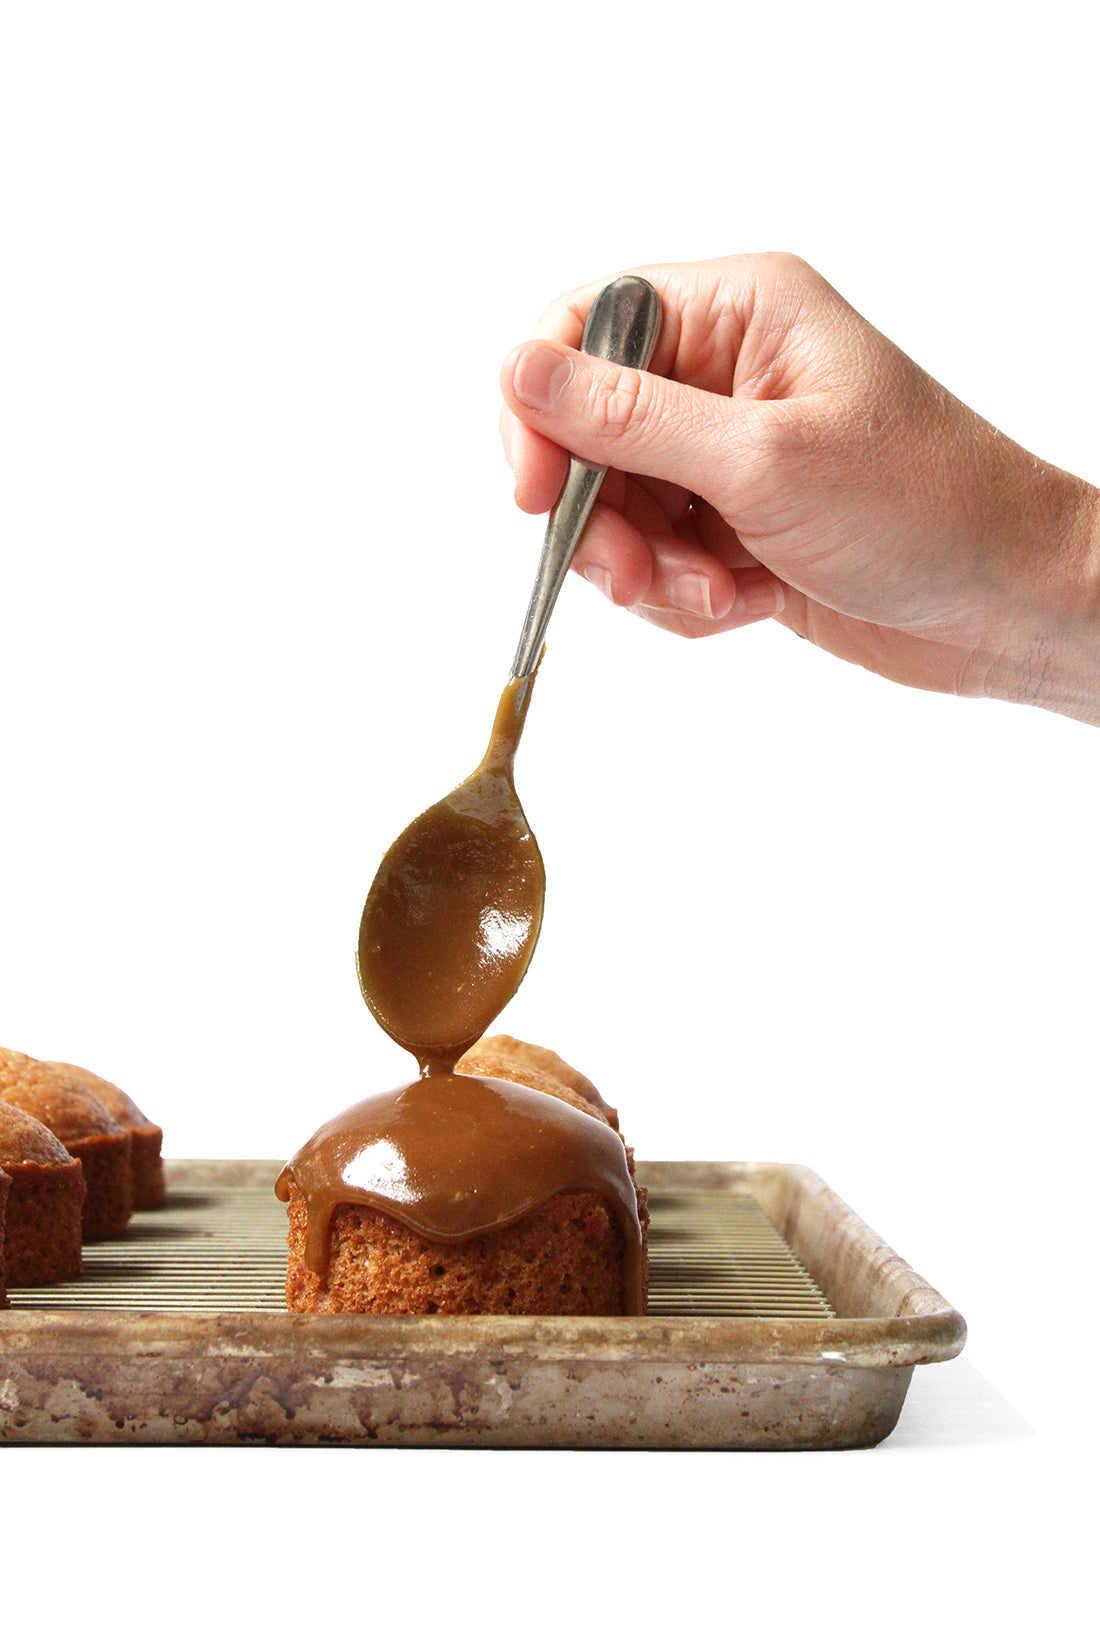 Image from the side of a hand holding a spoon drizzling toffee onto Miss Jones Baking Co Sticky Toffee Cakes on a baking sheet